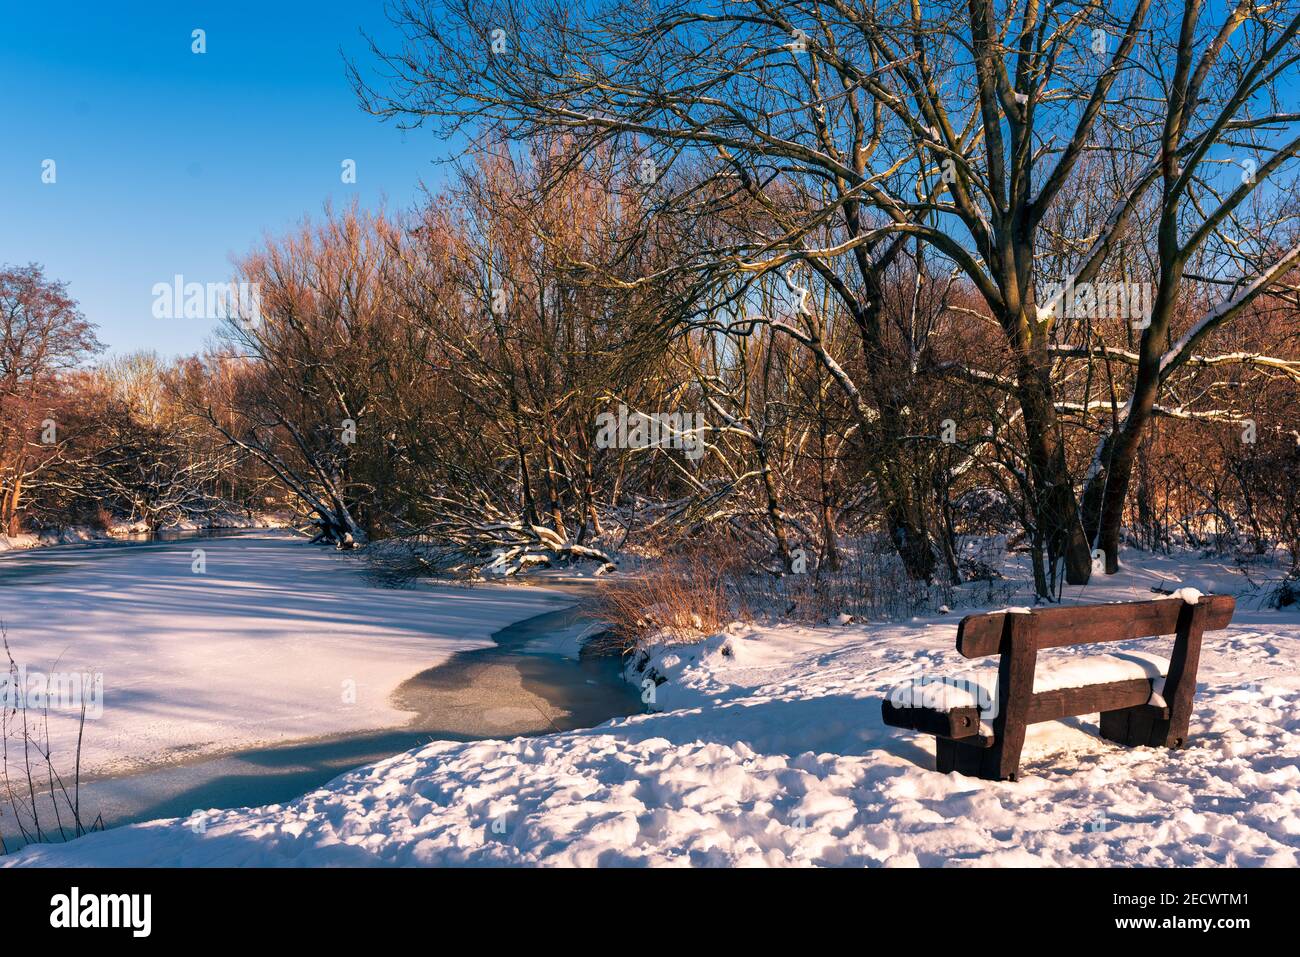 a park bench in the snow by the frozen river Stock Photo